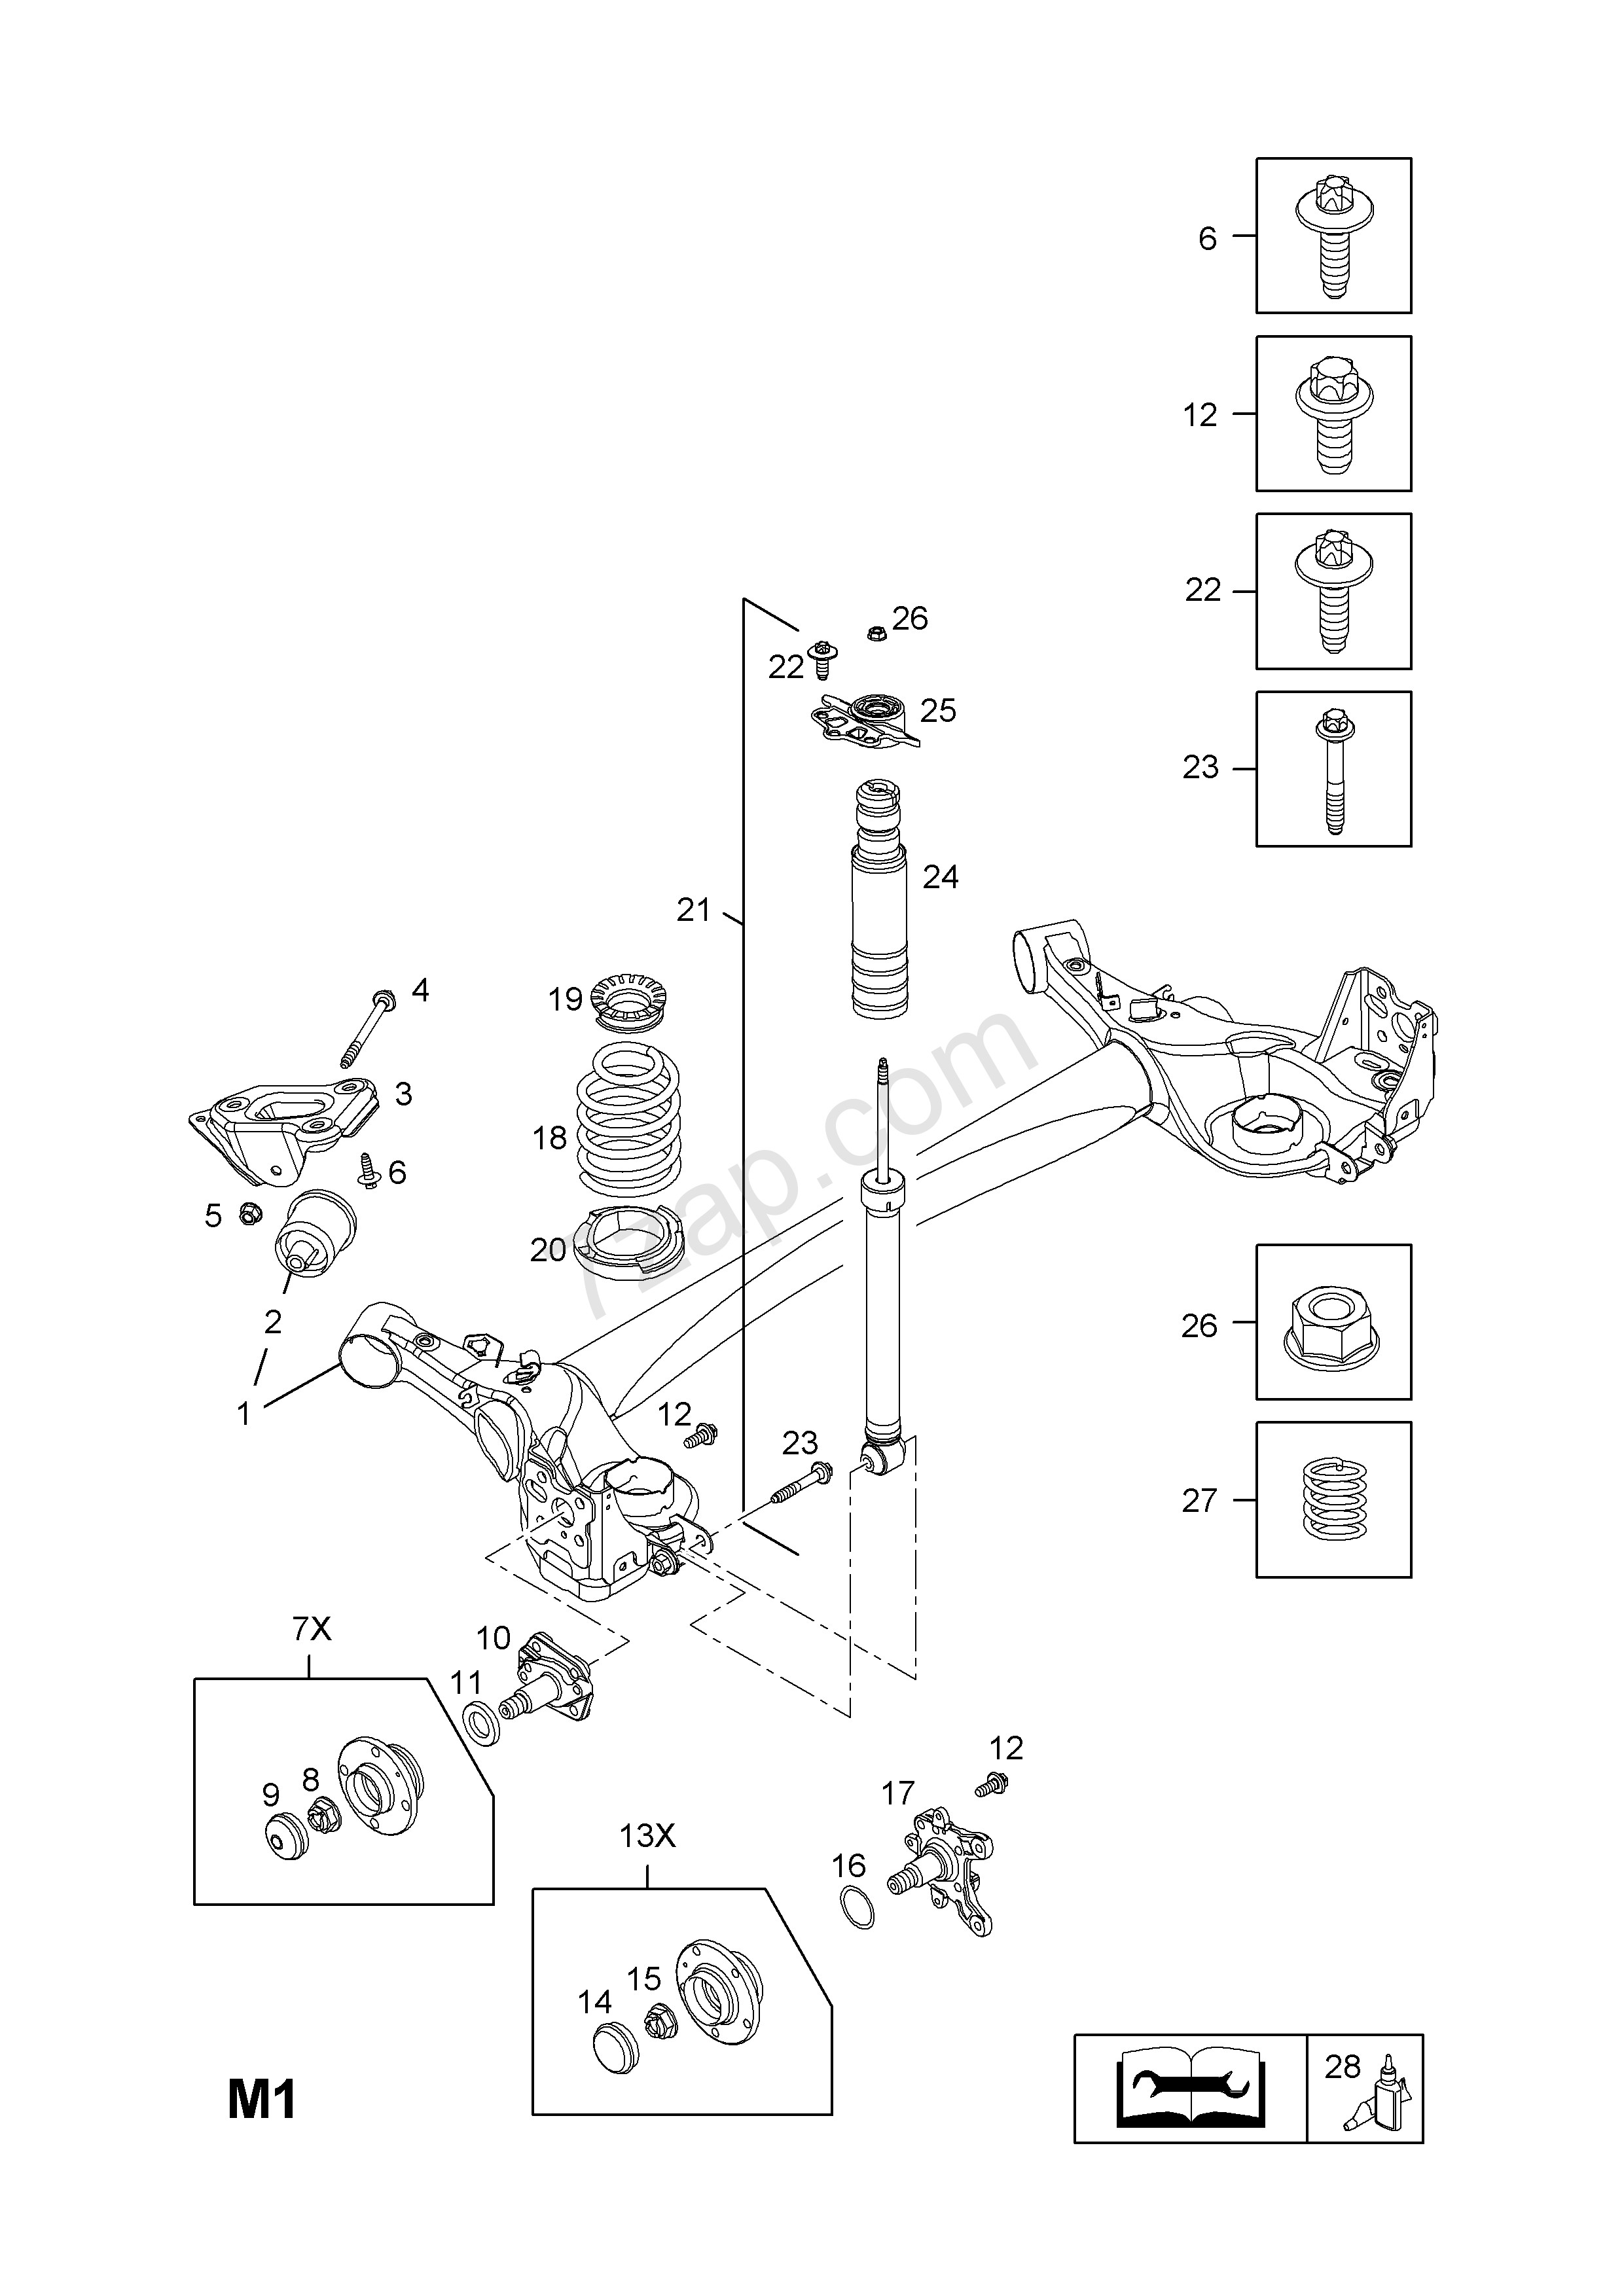 Rear Brake Drum assembly Diagram Rear Hub [used when Front Disc and Rear Drum Brakes Fitted] Opel Corsa D Of Rear Brake Drum assembly Diagram